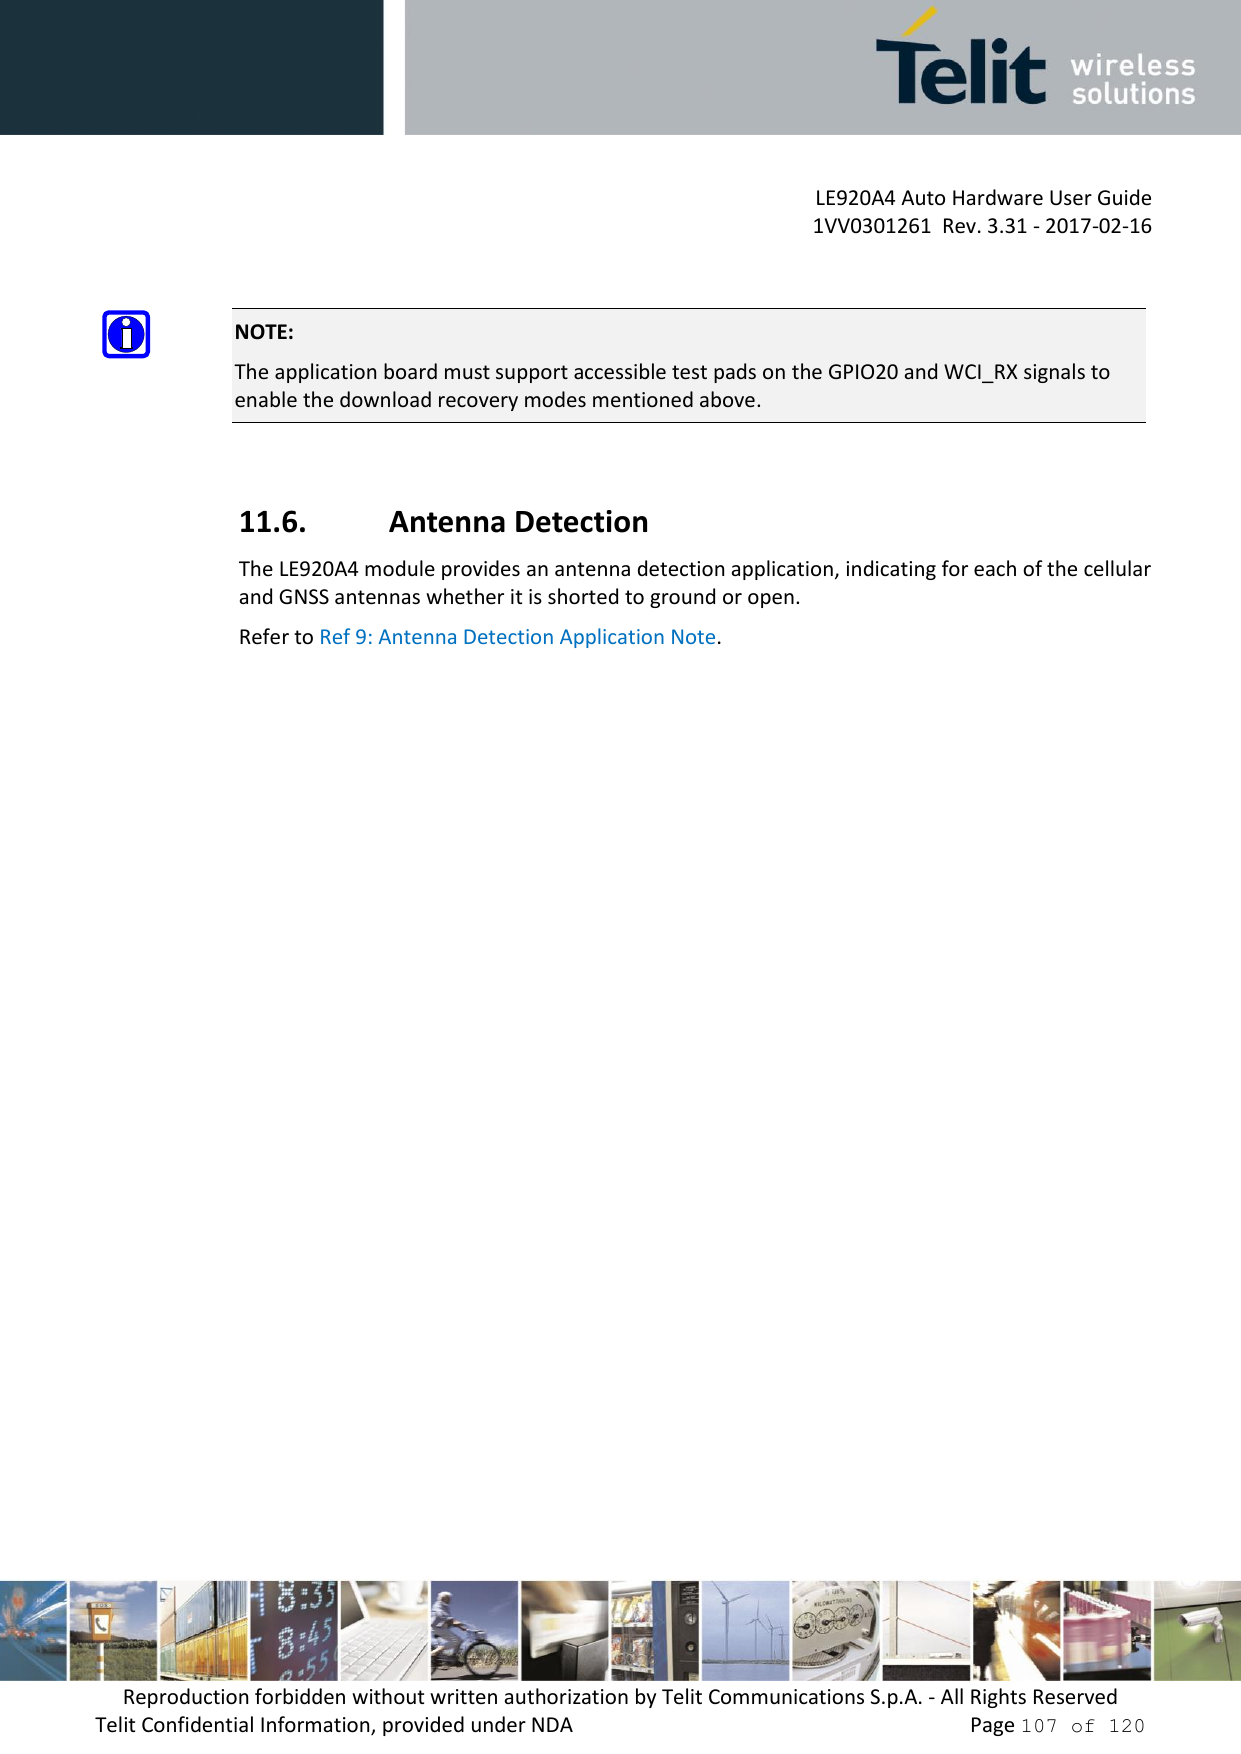 LE920A4 Auto Hardware User Guide 1VV0301261  Rev. 3.31 - 2017-02-16 Reproduction forbidden without written authorization by Telit Communications S.p.A. - All Rights Reserved Telit Confidential Information, provided under NDA   Page 107 of 120 NOTE: The application board must support accessible test pads on the GPIO20 and WCI_RX signals to enable the download recovery modes mentioned above. 11.6. Antenna Detection The LE920A4 module provides an antenna detection application, indicating for each of the cellular and GNSS antennas whether it is shorted to ground or open. Refer to Ref 9: Antenna Detection Application Note. 